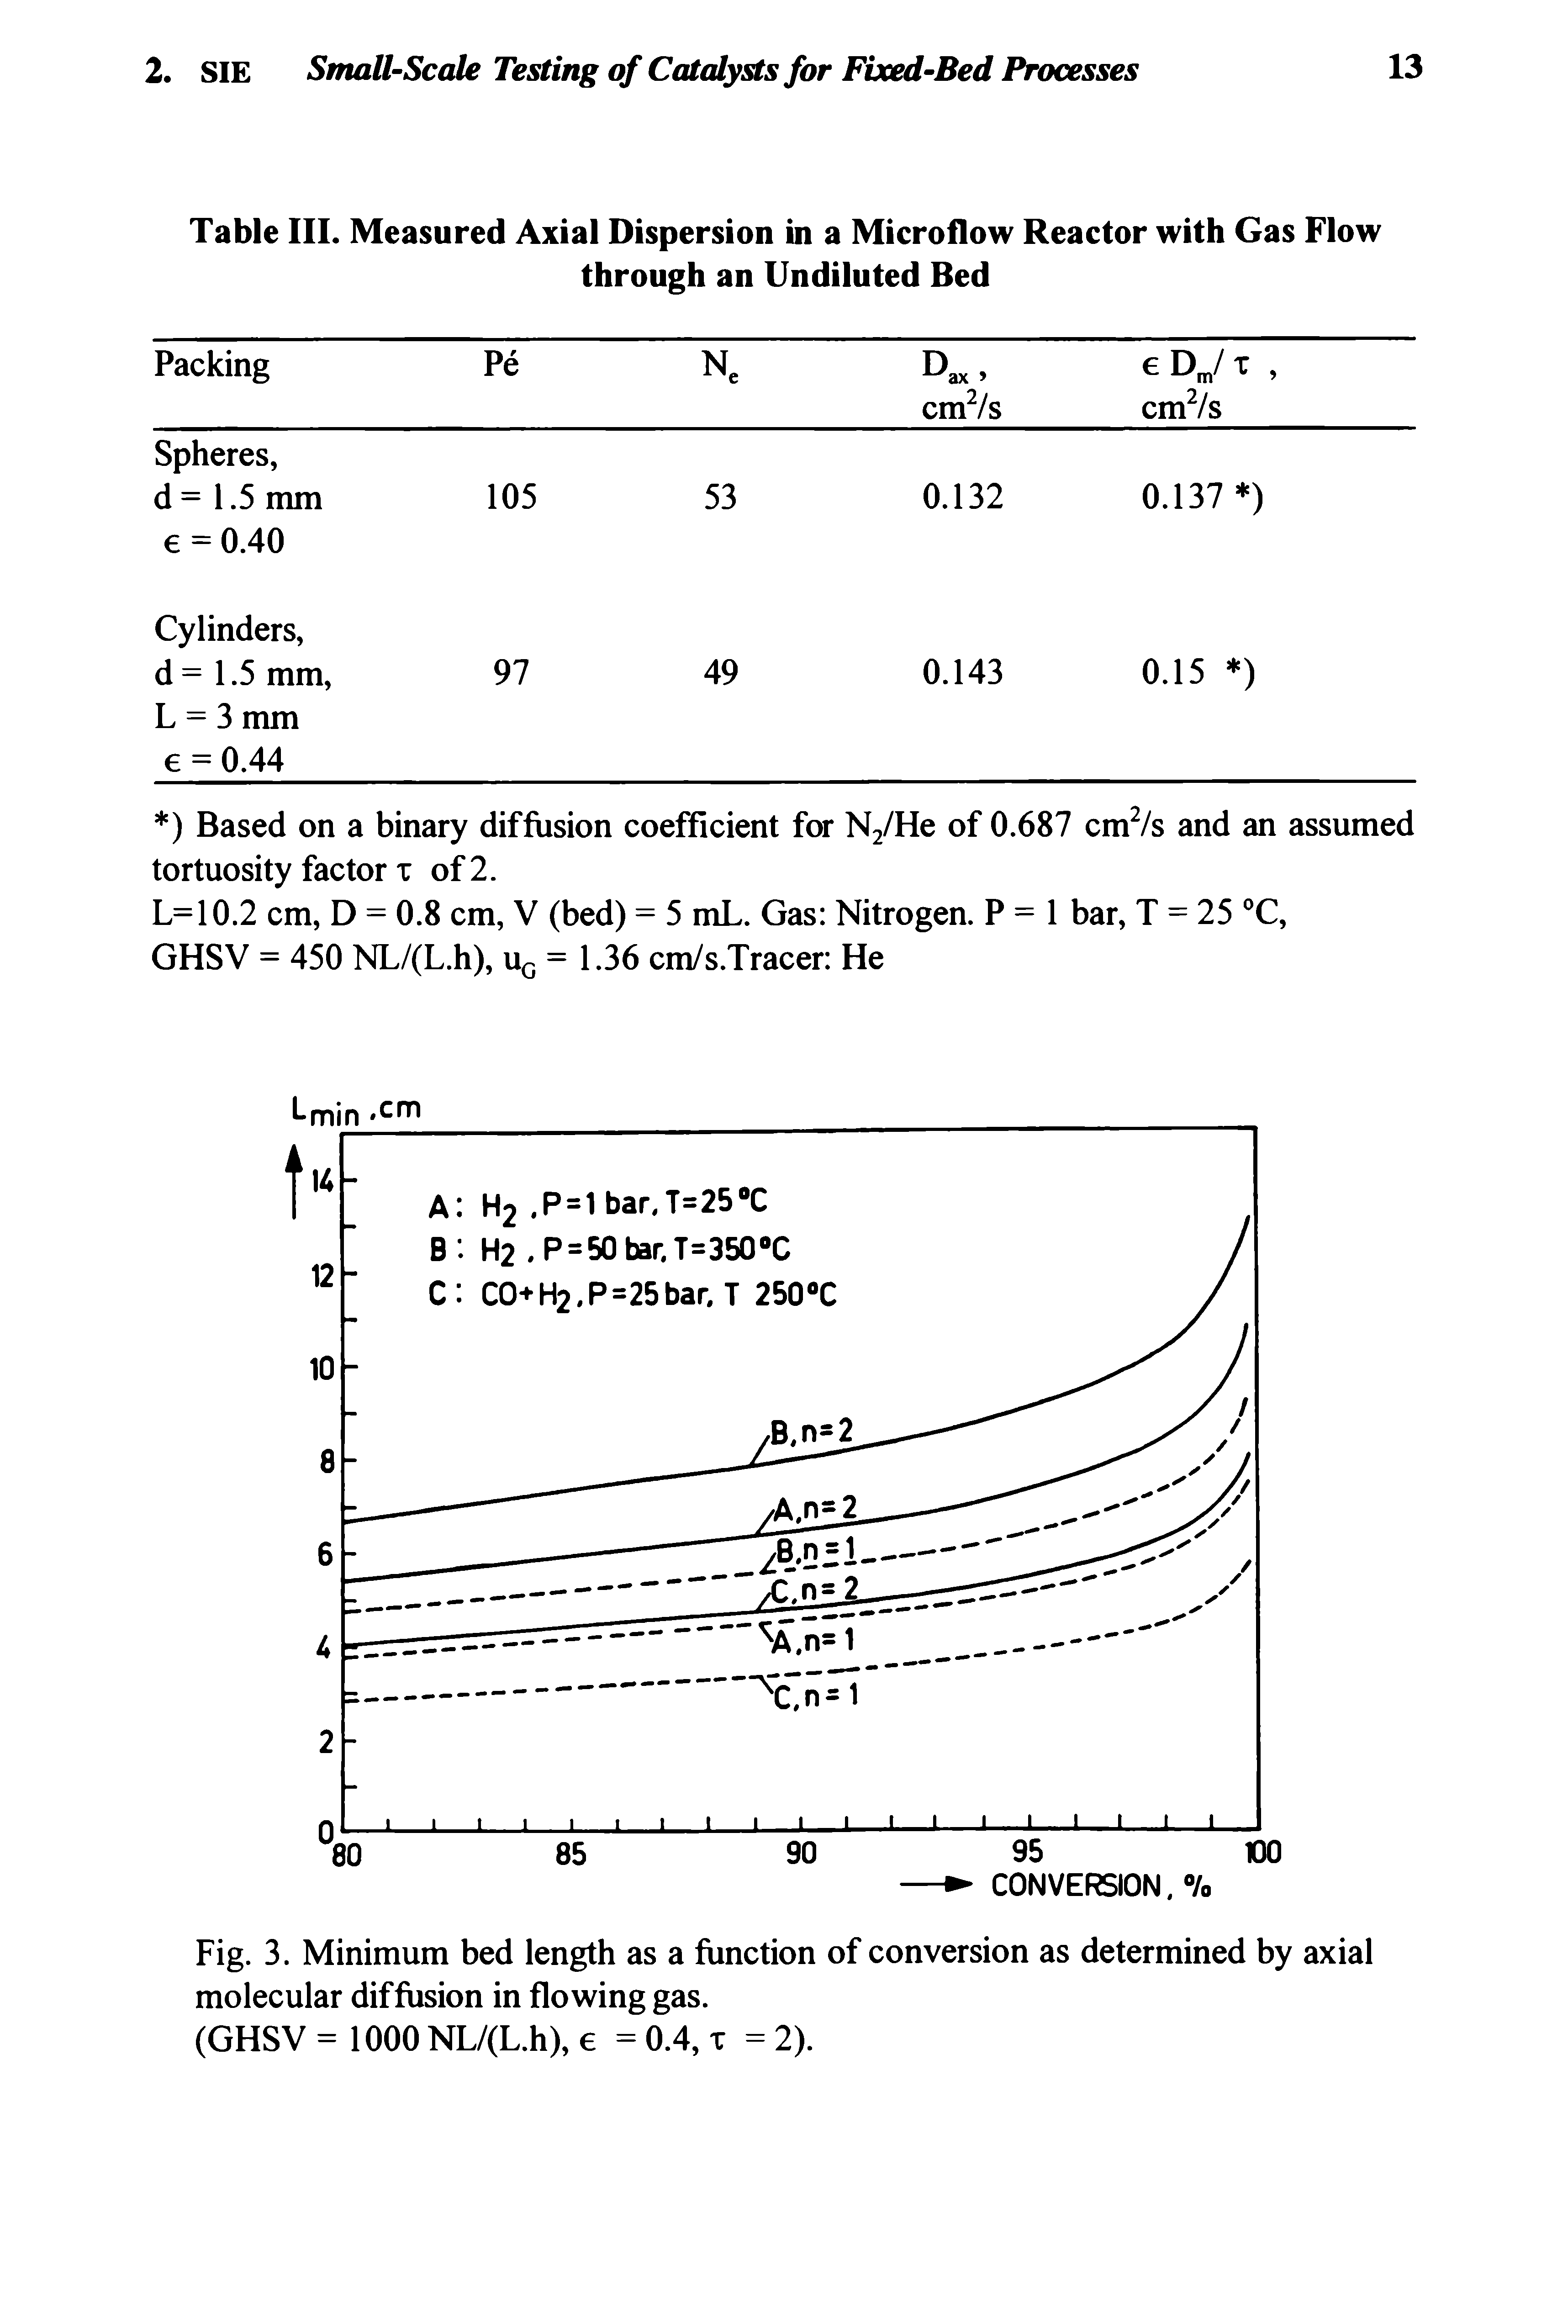 Table III. Measured Axial Dispersion in a Microflow Reactor with Gas Flow through an Undiluted Bed...